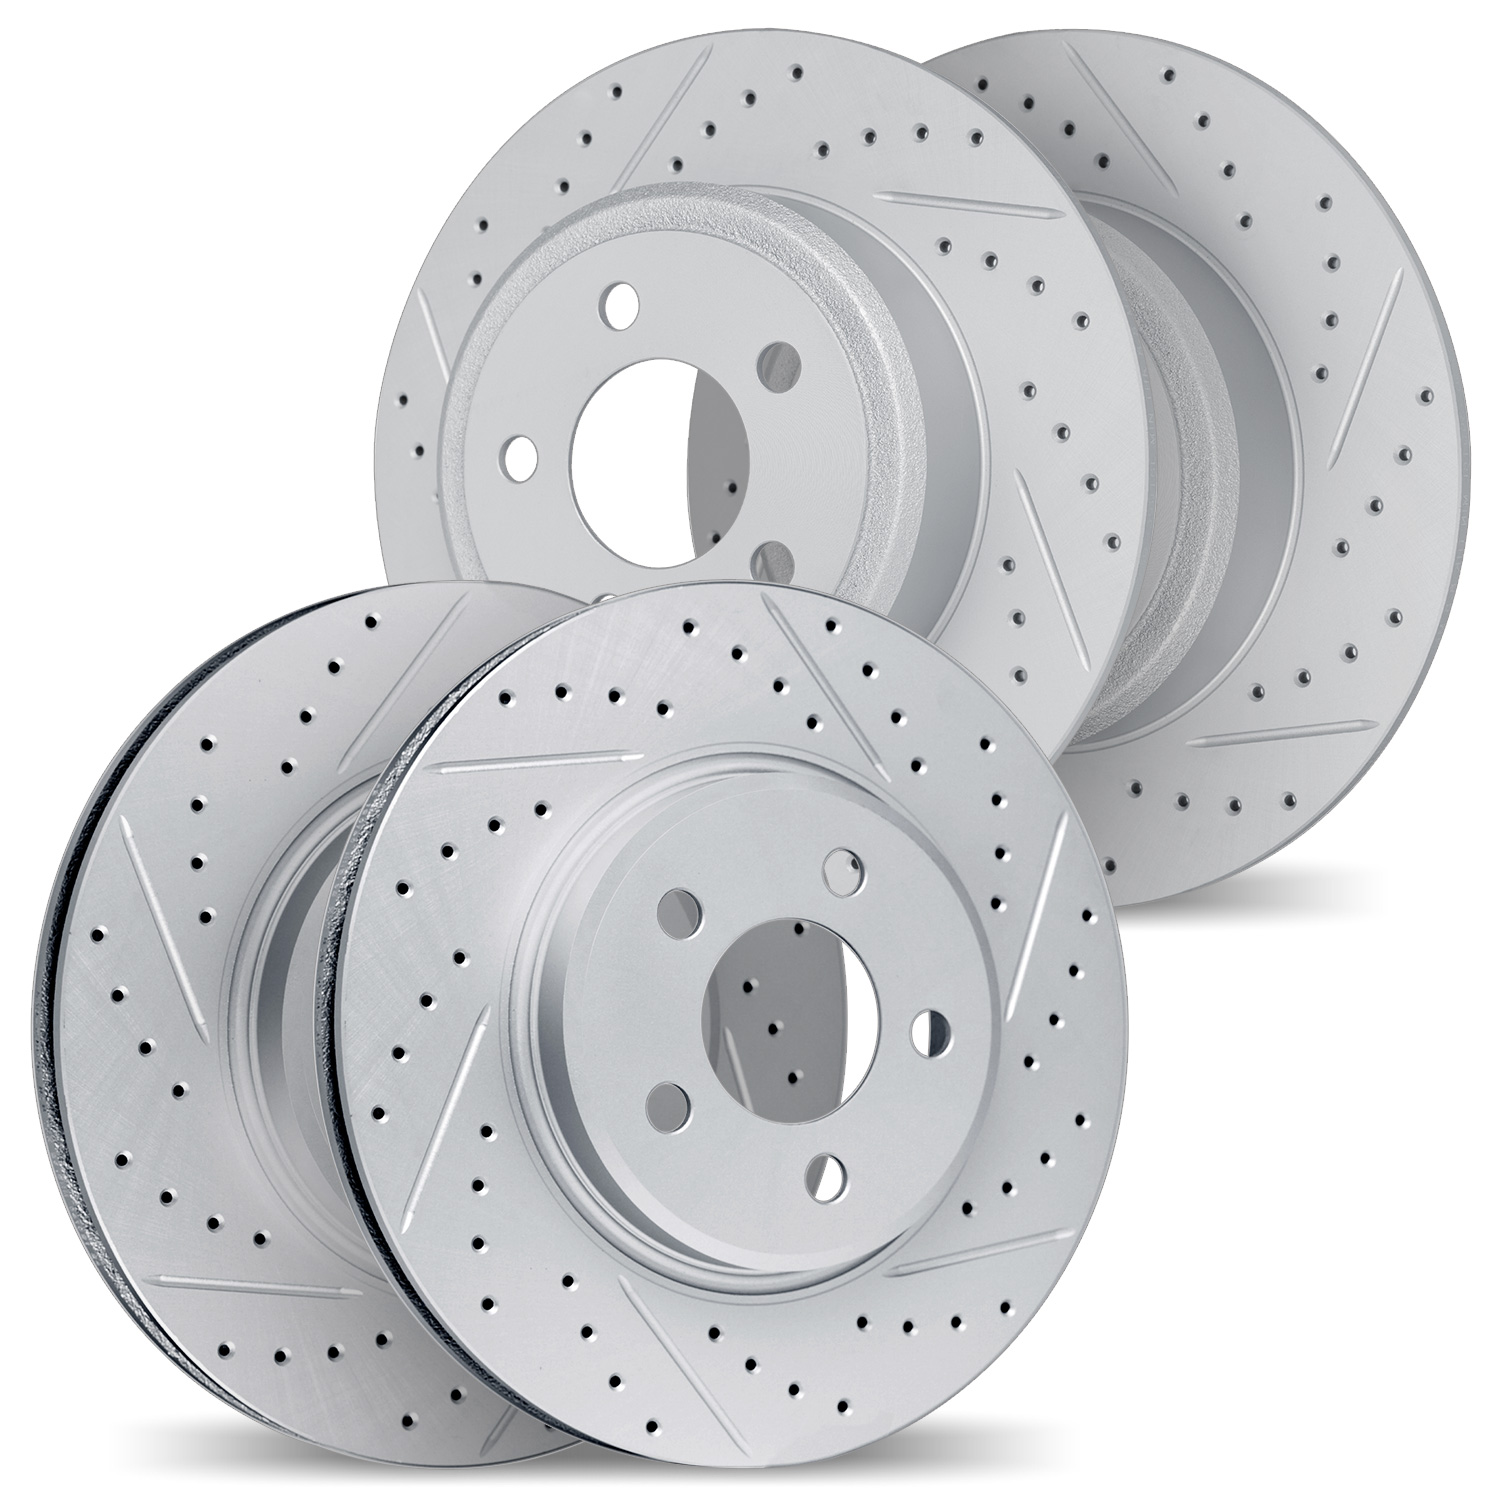 2004-59012 Geoperformance Drilled/Slotted Brake Rotors, 2001-2008 Acura/Honda, Position: Front and Rear